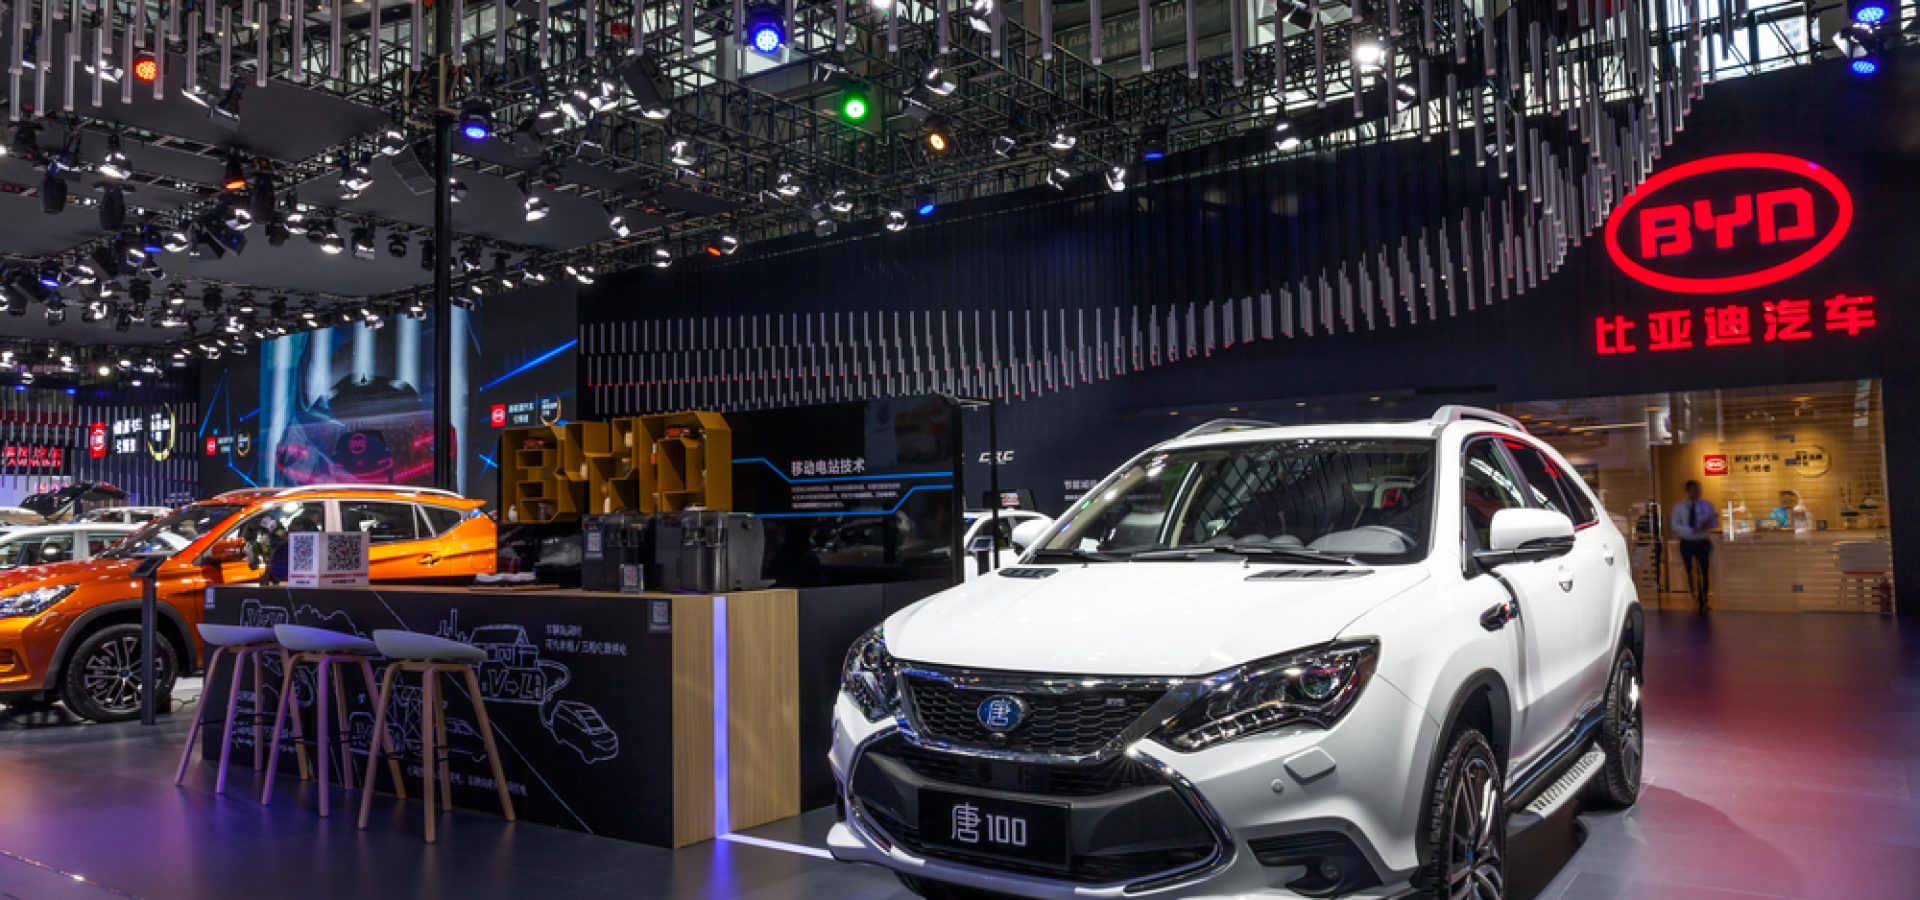 BYD stops producing full combustion engine cars